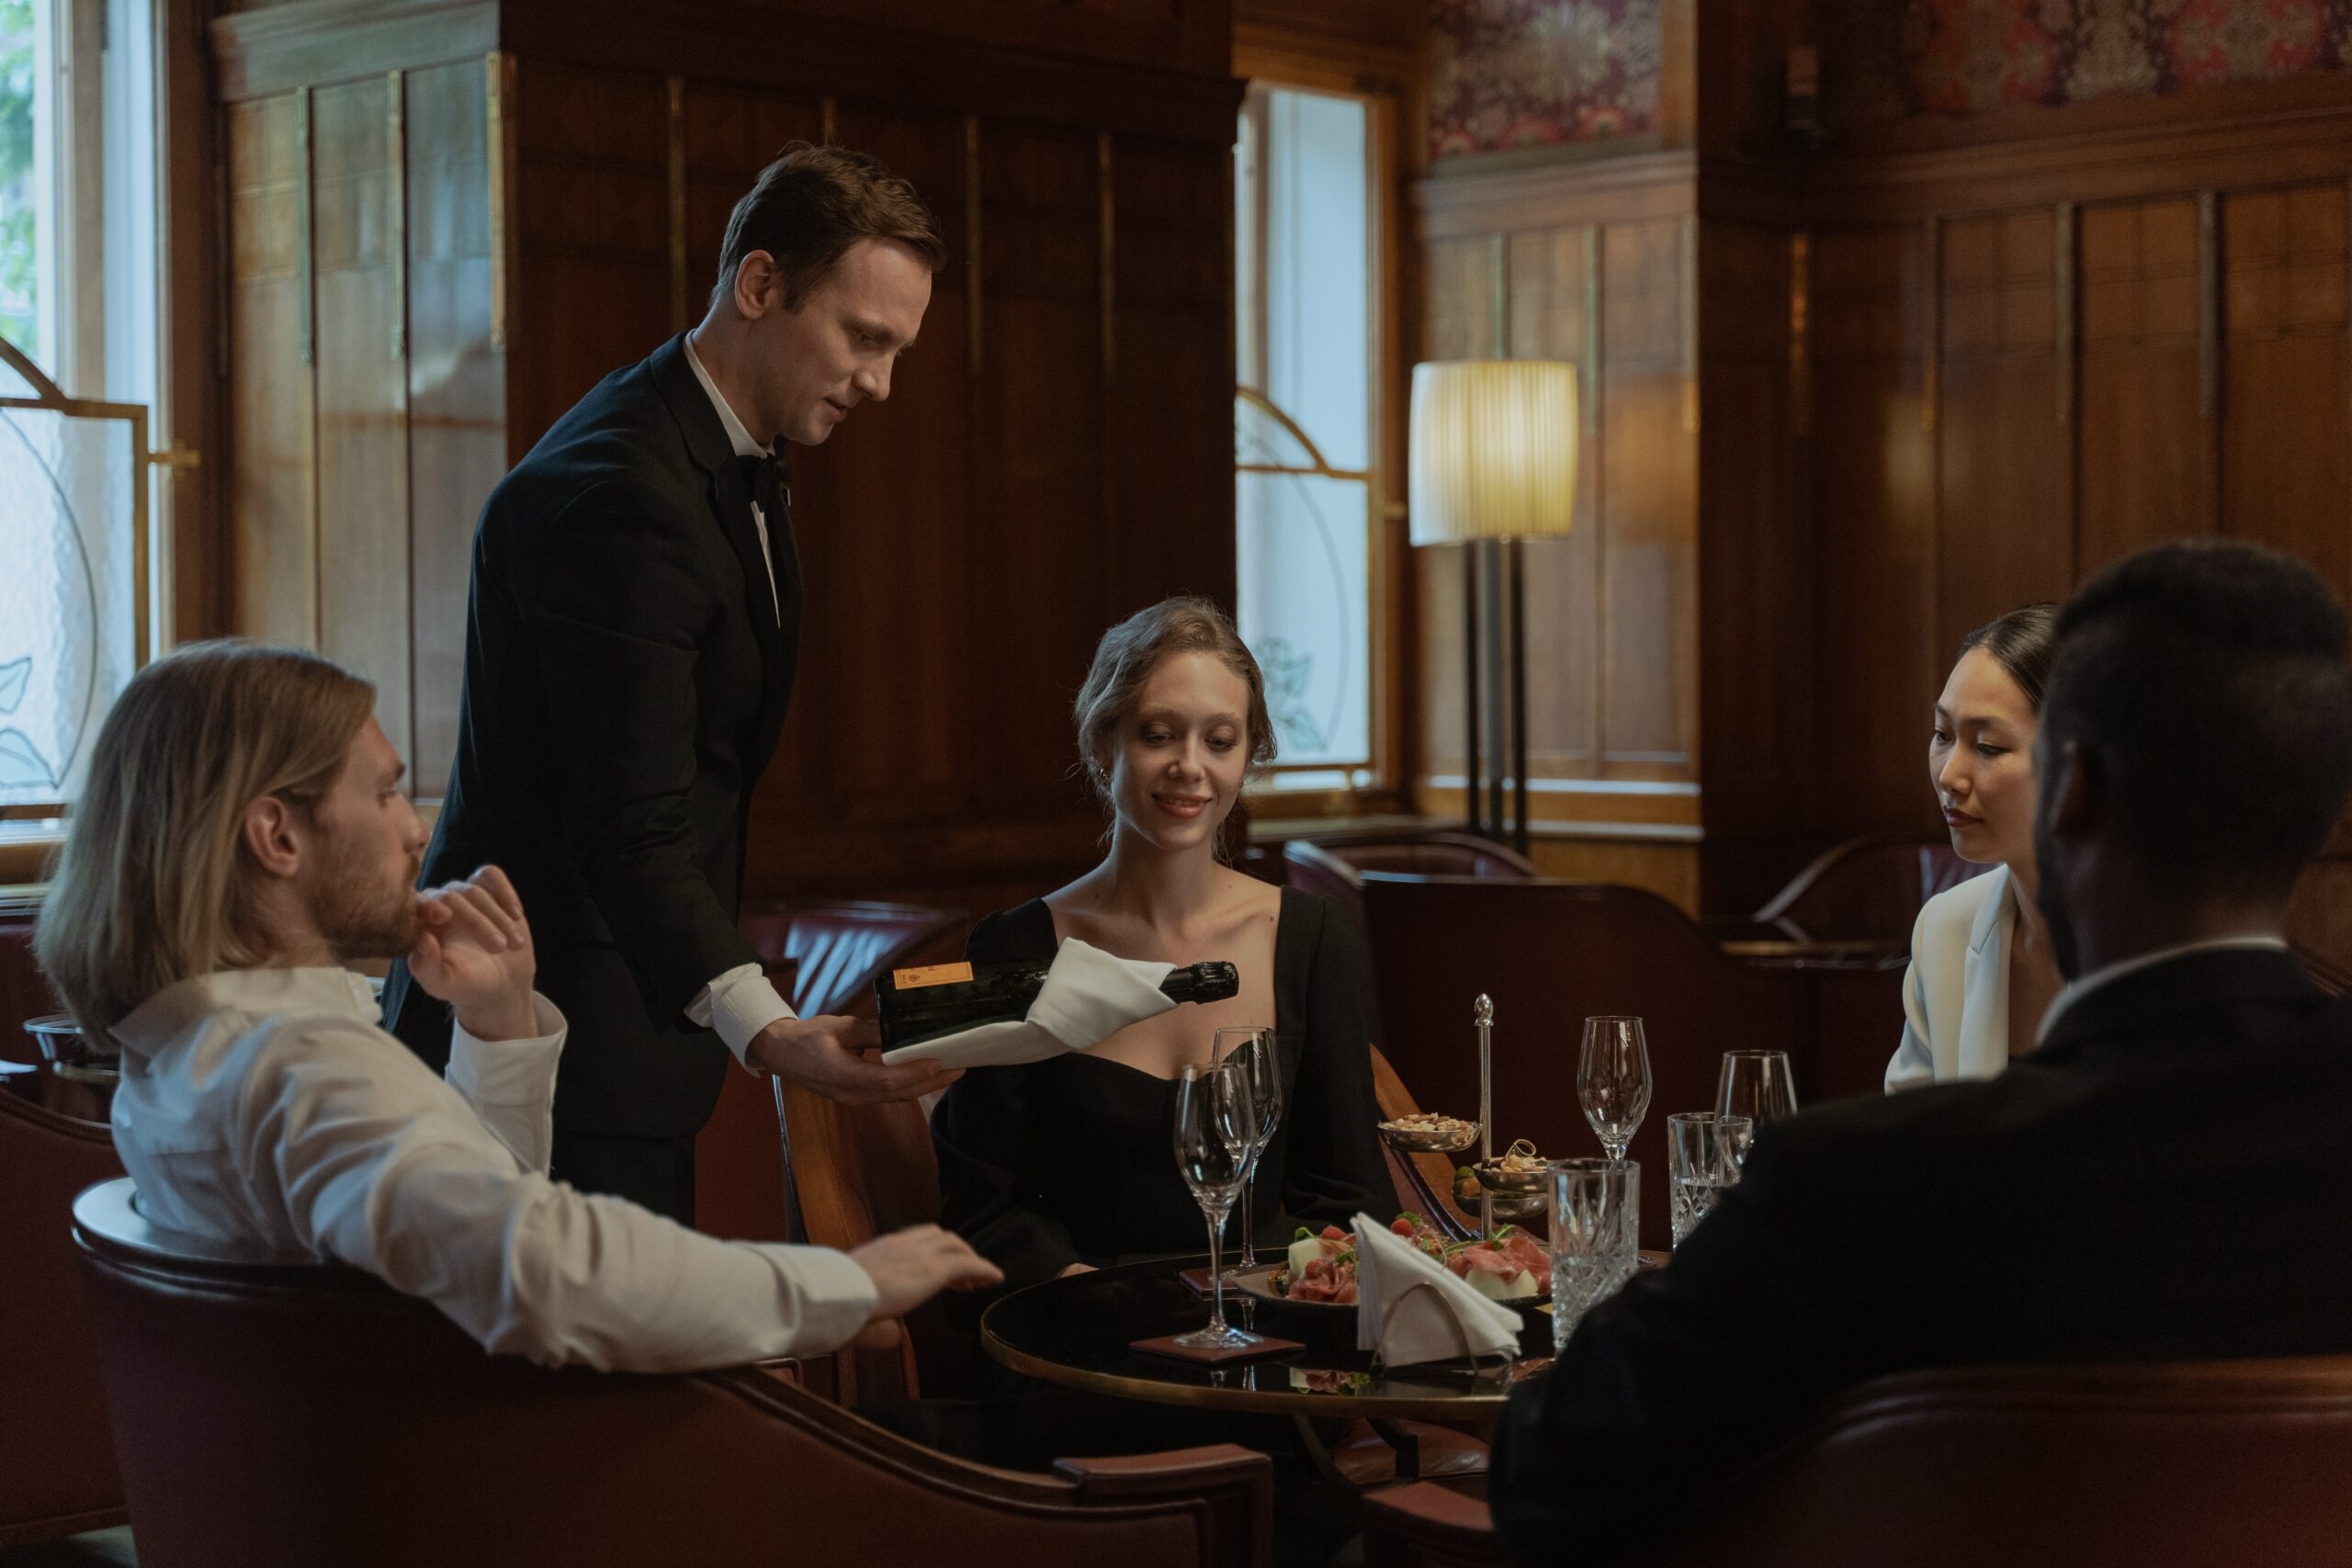 A waiter pours a wine from the bottle to a girl, sitting with her friends in the restaurant.